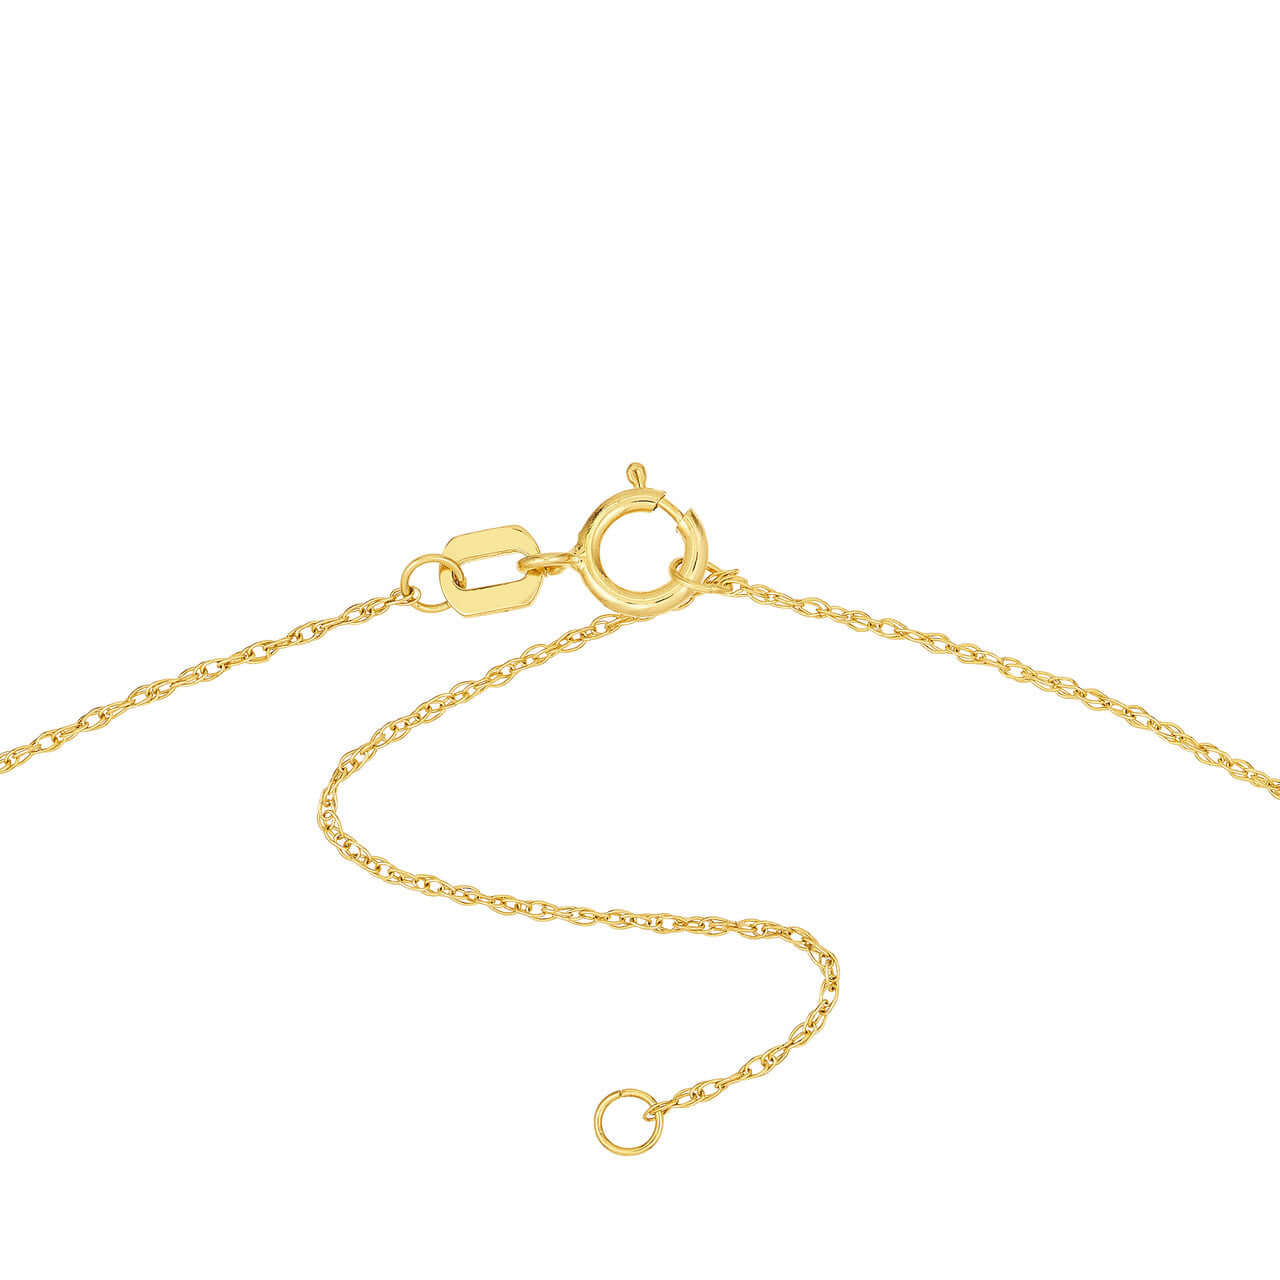 Gold Disc Cut Out ECG Heartbeat Necklace Lisa Robin